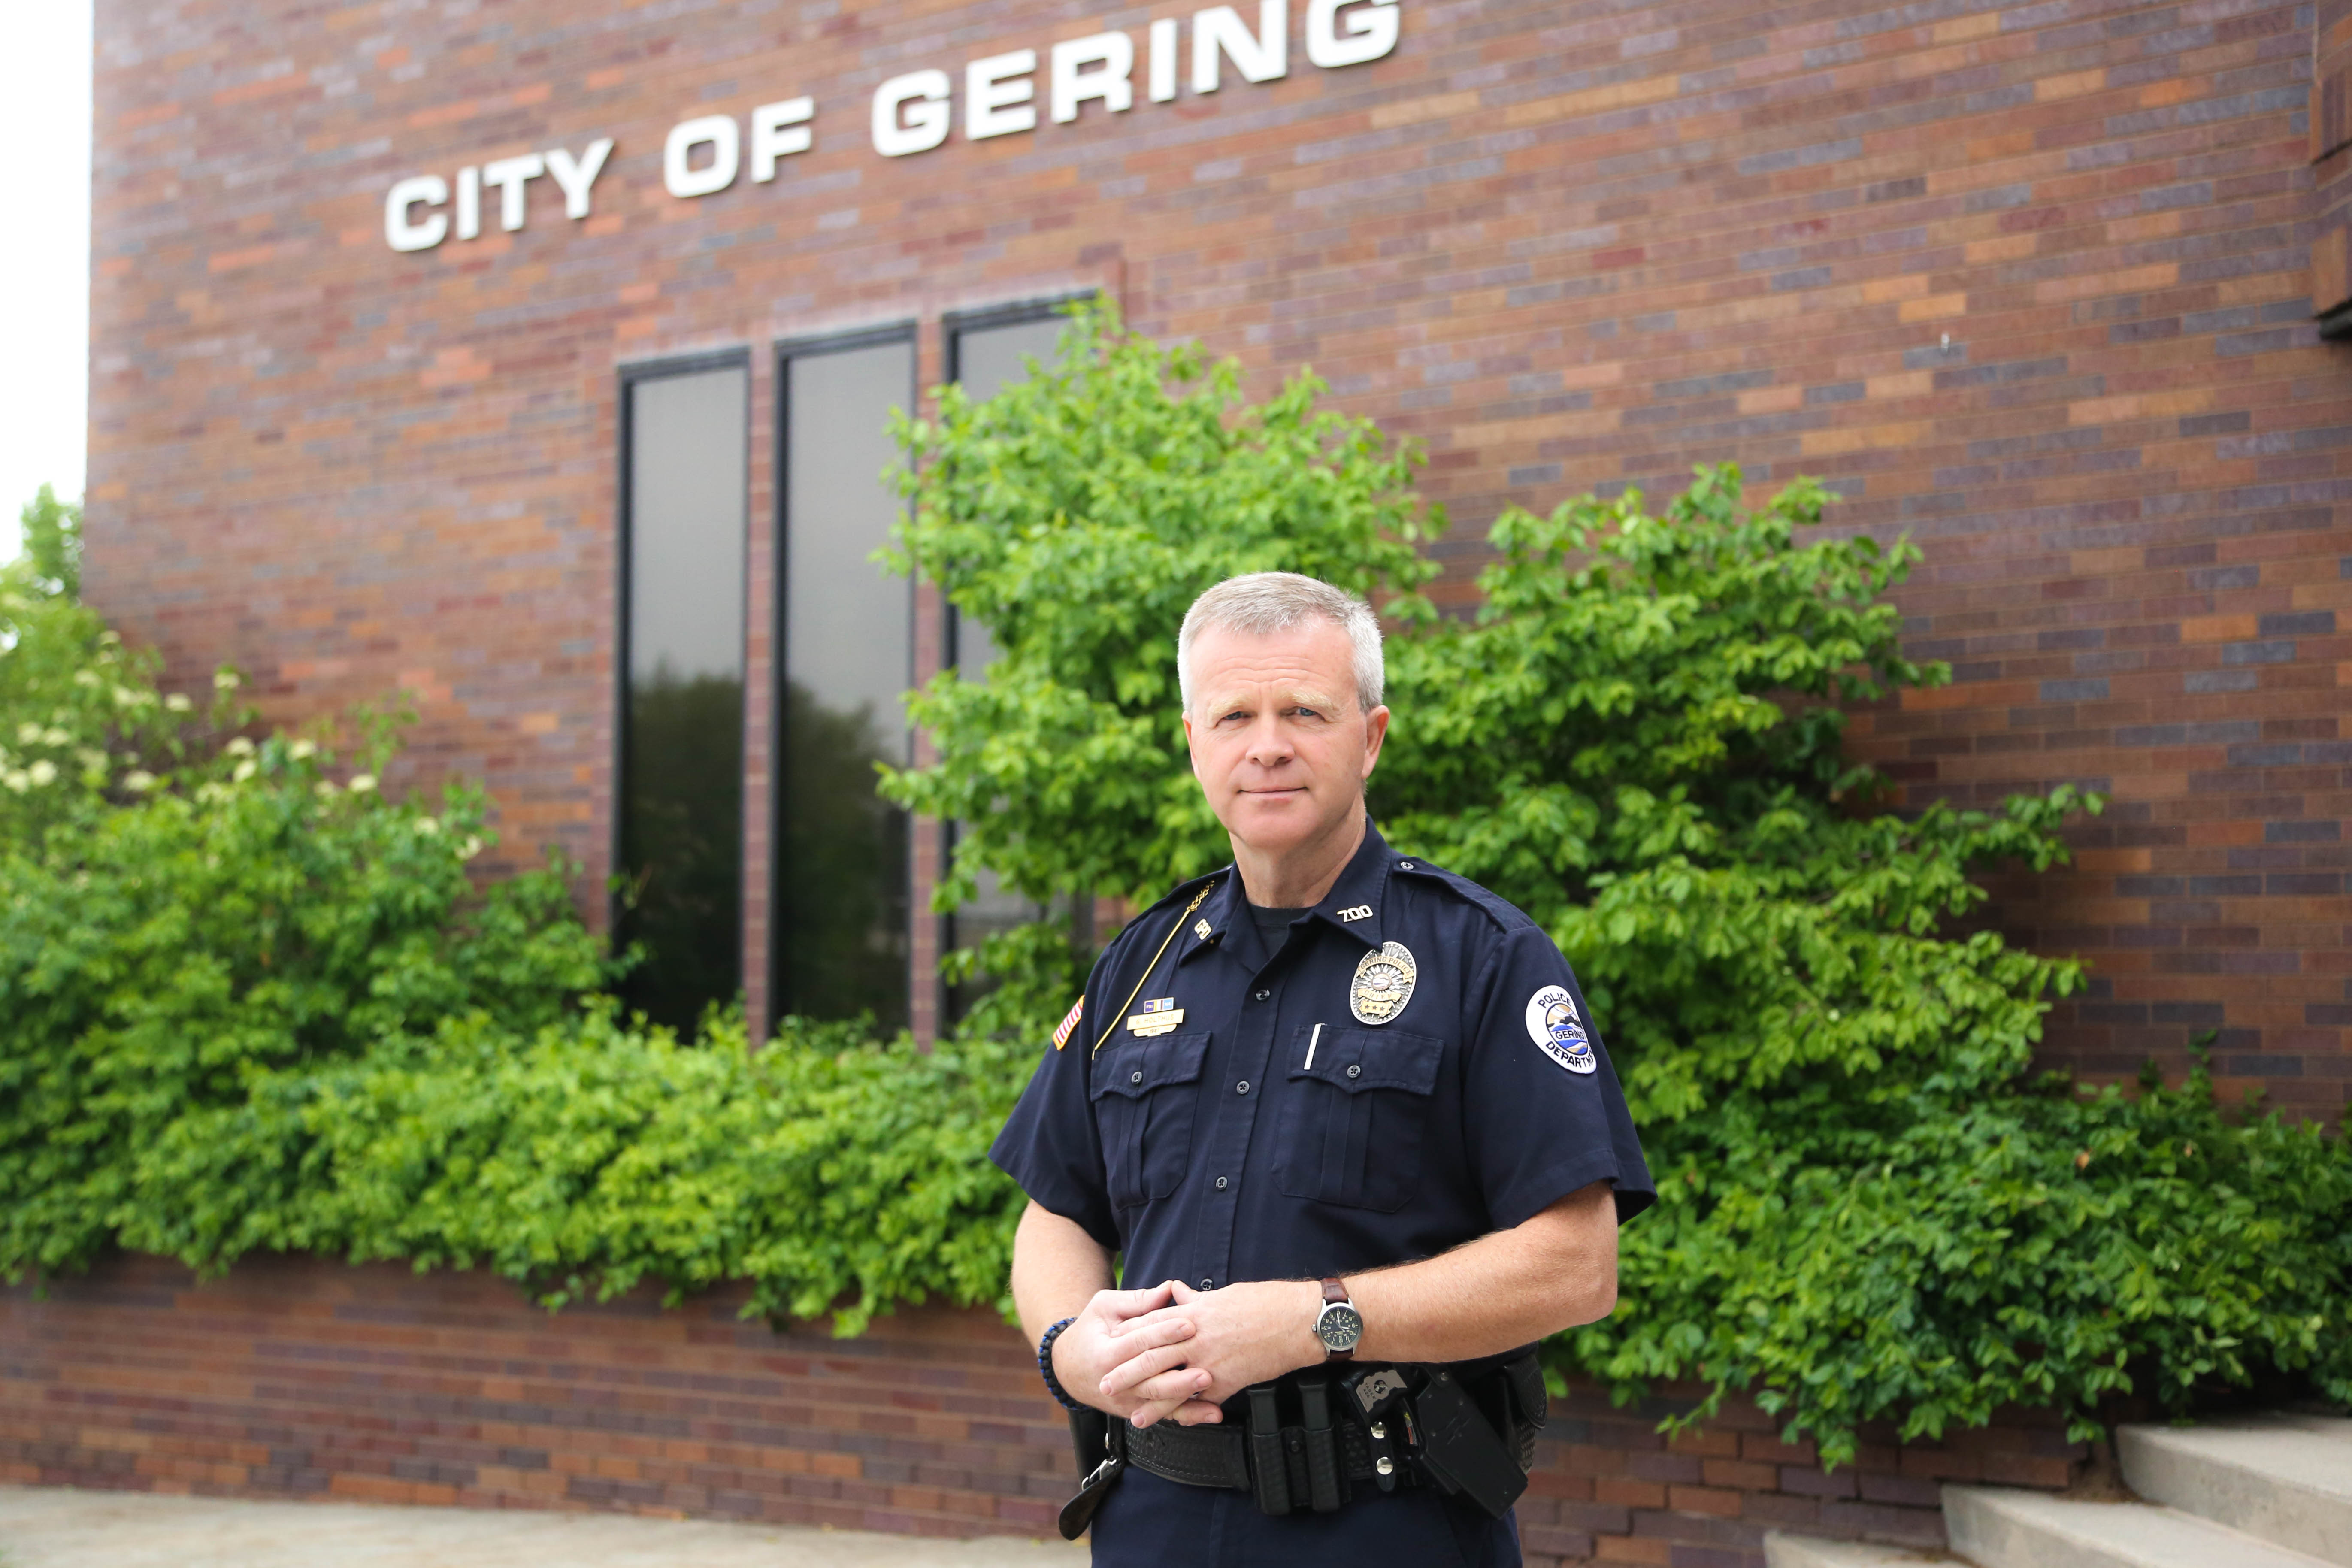 Image of Geortge Holthus, Gering Police Chief